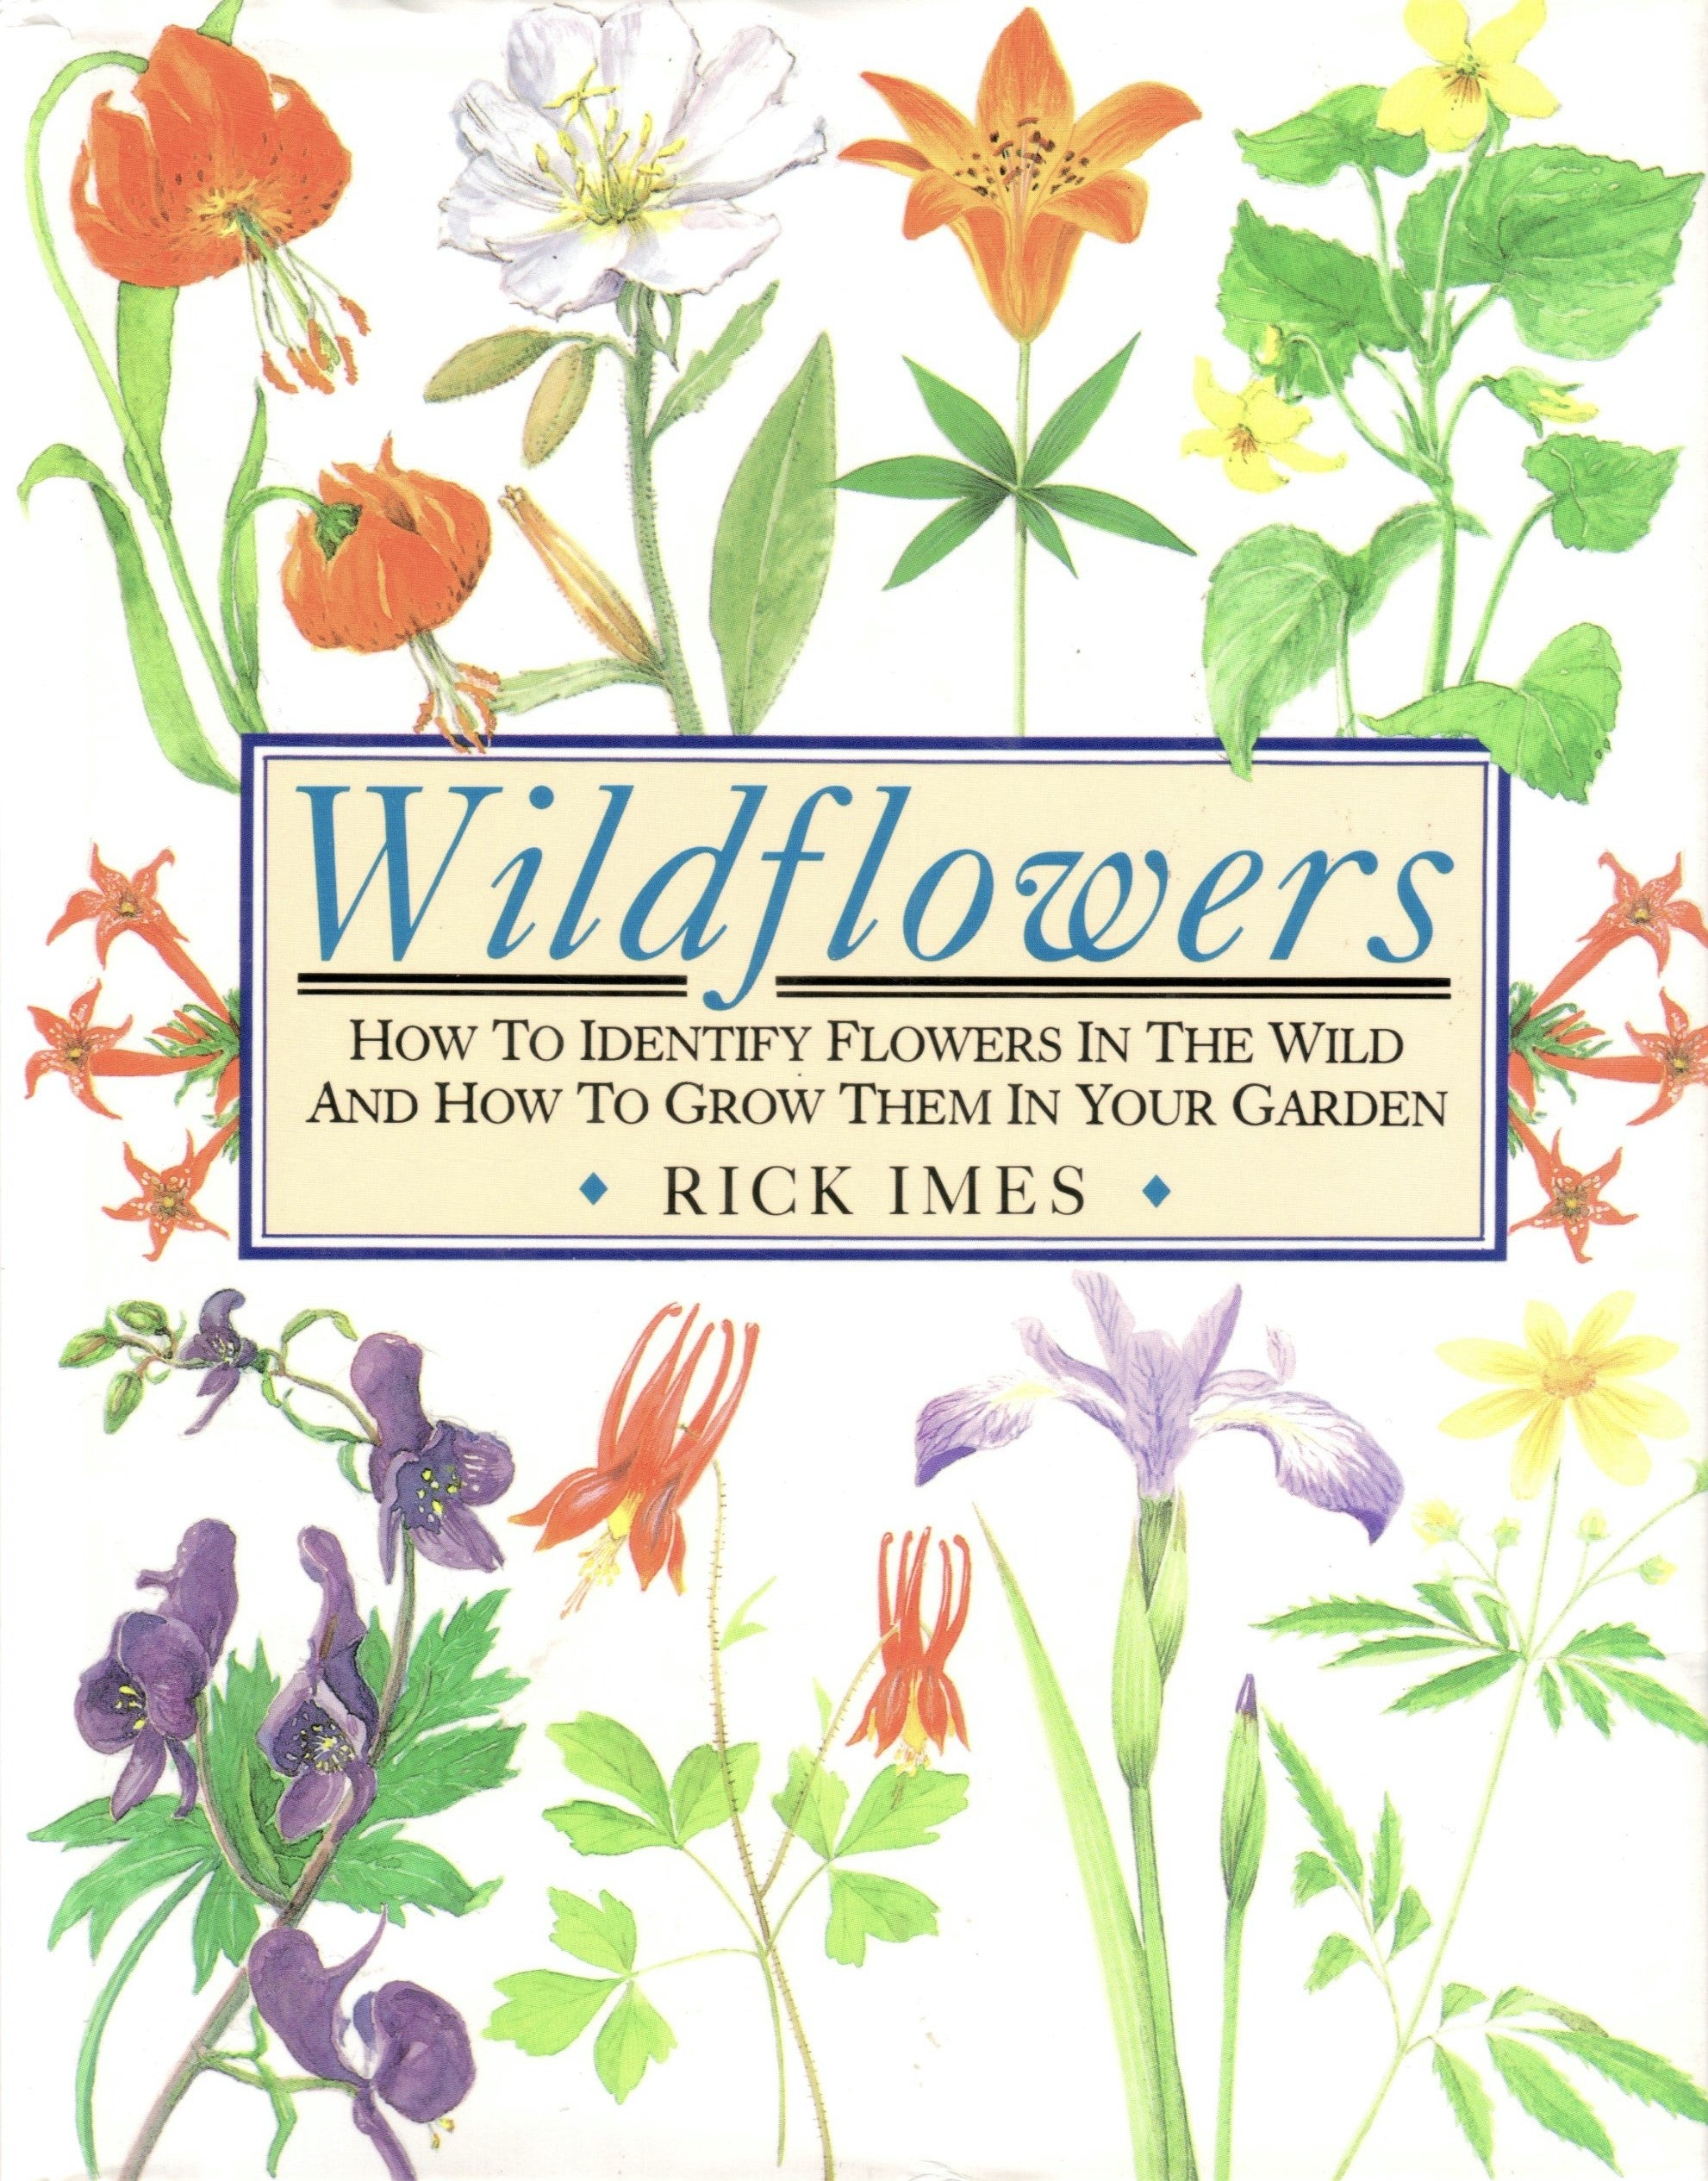 Wildflowers: How to Identify Flowers in the Wild and How to Grow Them in Your Garden - Rick Imes